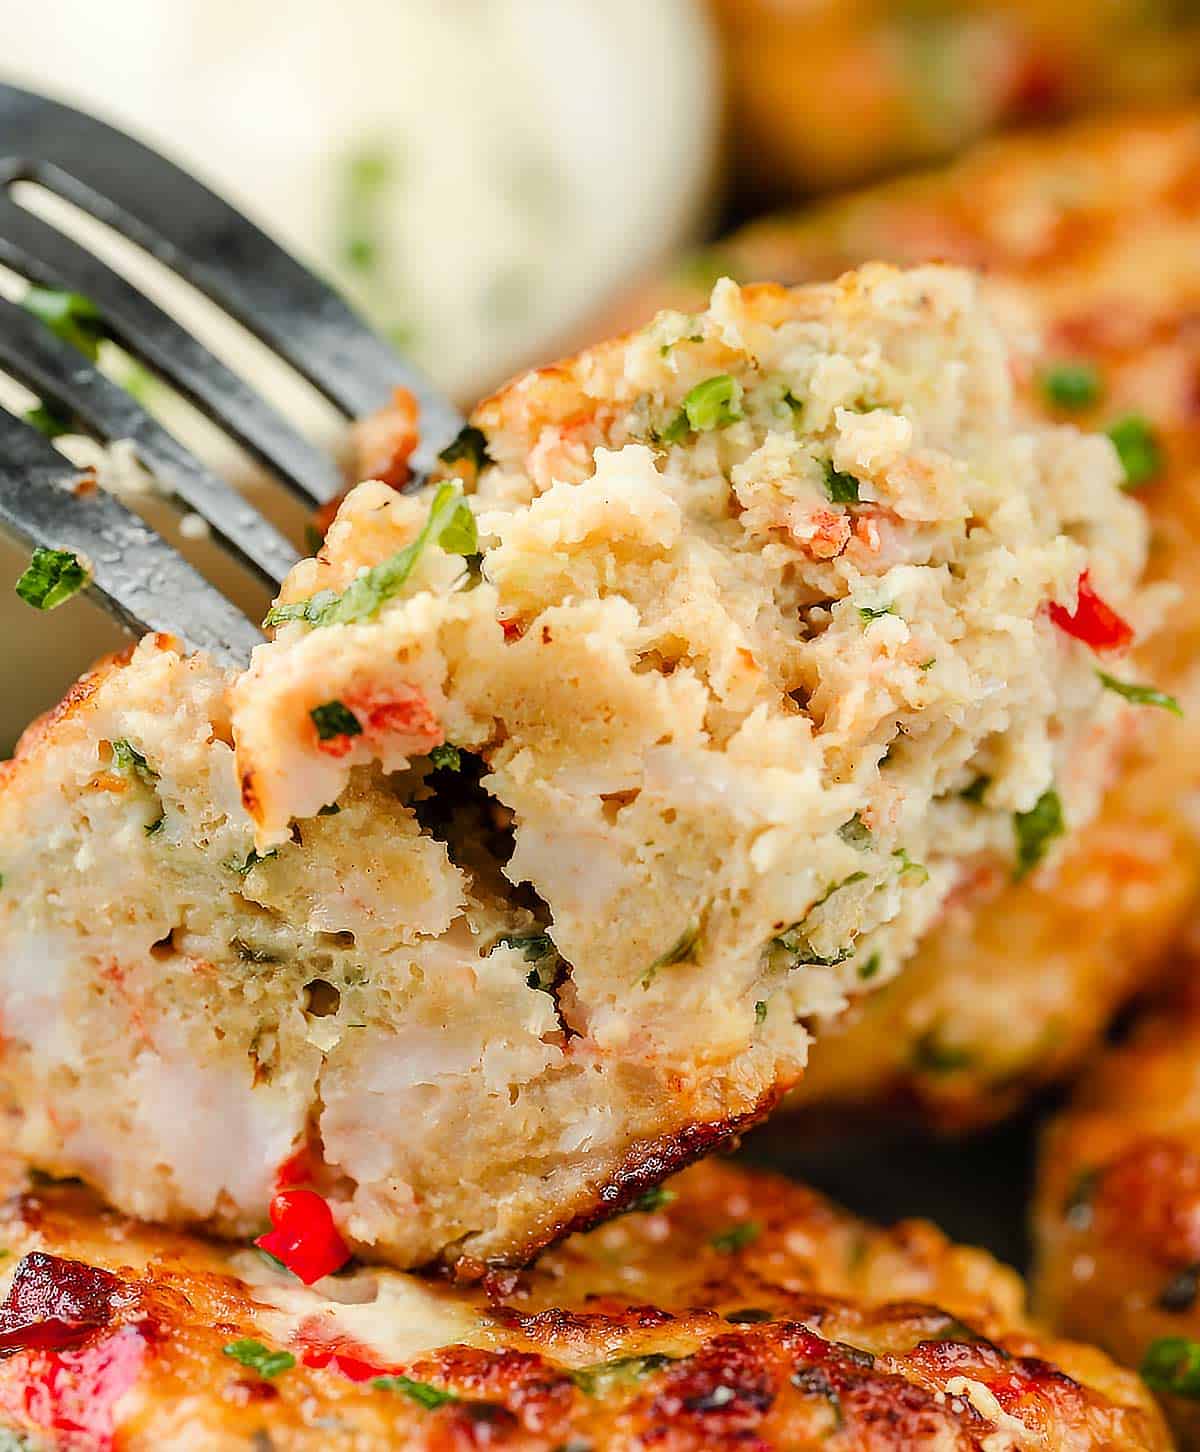 A delicious piece of shrimp cake skewered on a fork, ready to be enjoyed.